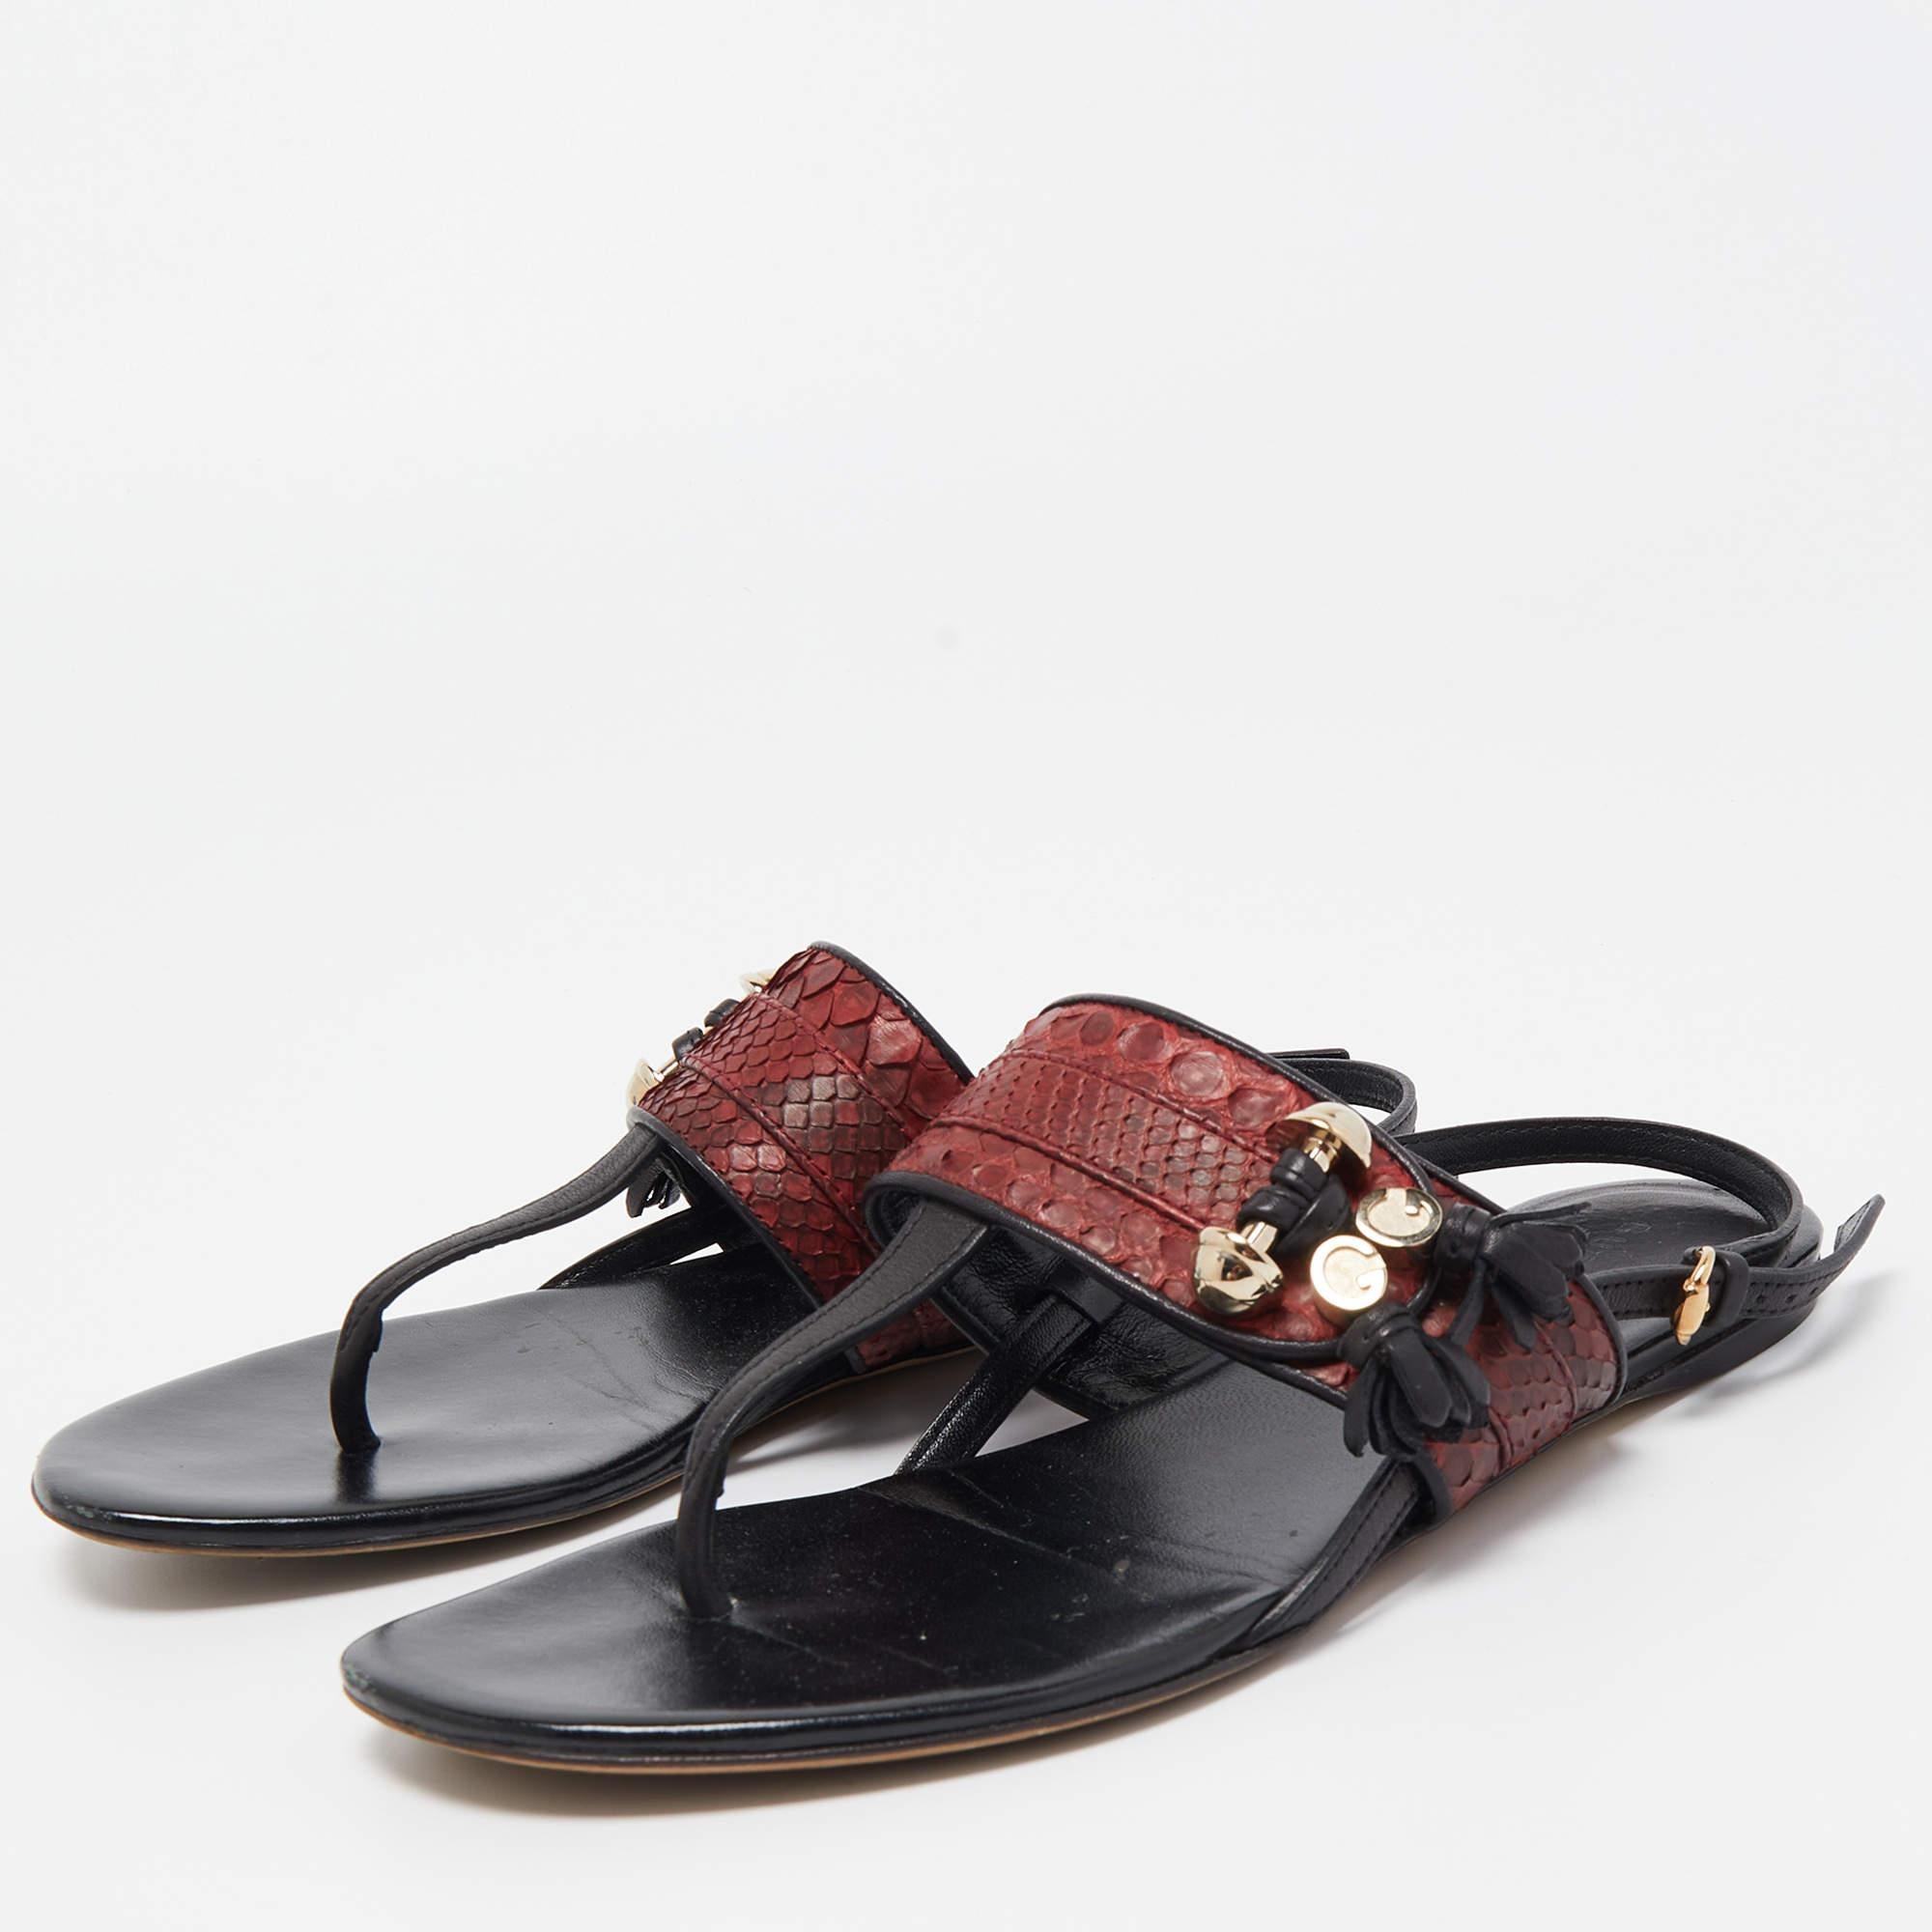 These sandals will frame your feet in an elegant manner. Crafted from quality materials, they display a classy design and comfortable insoles.


